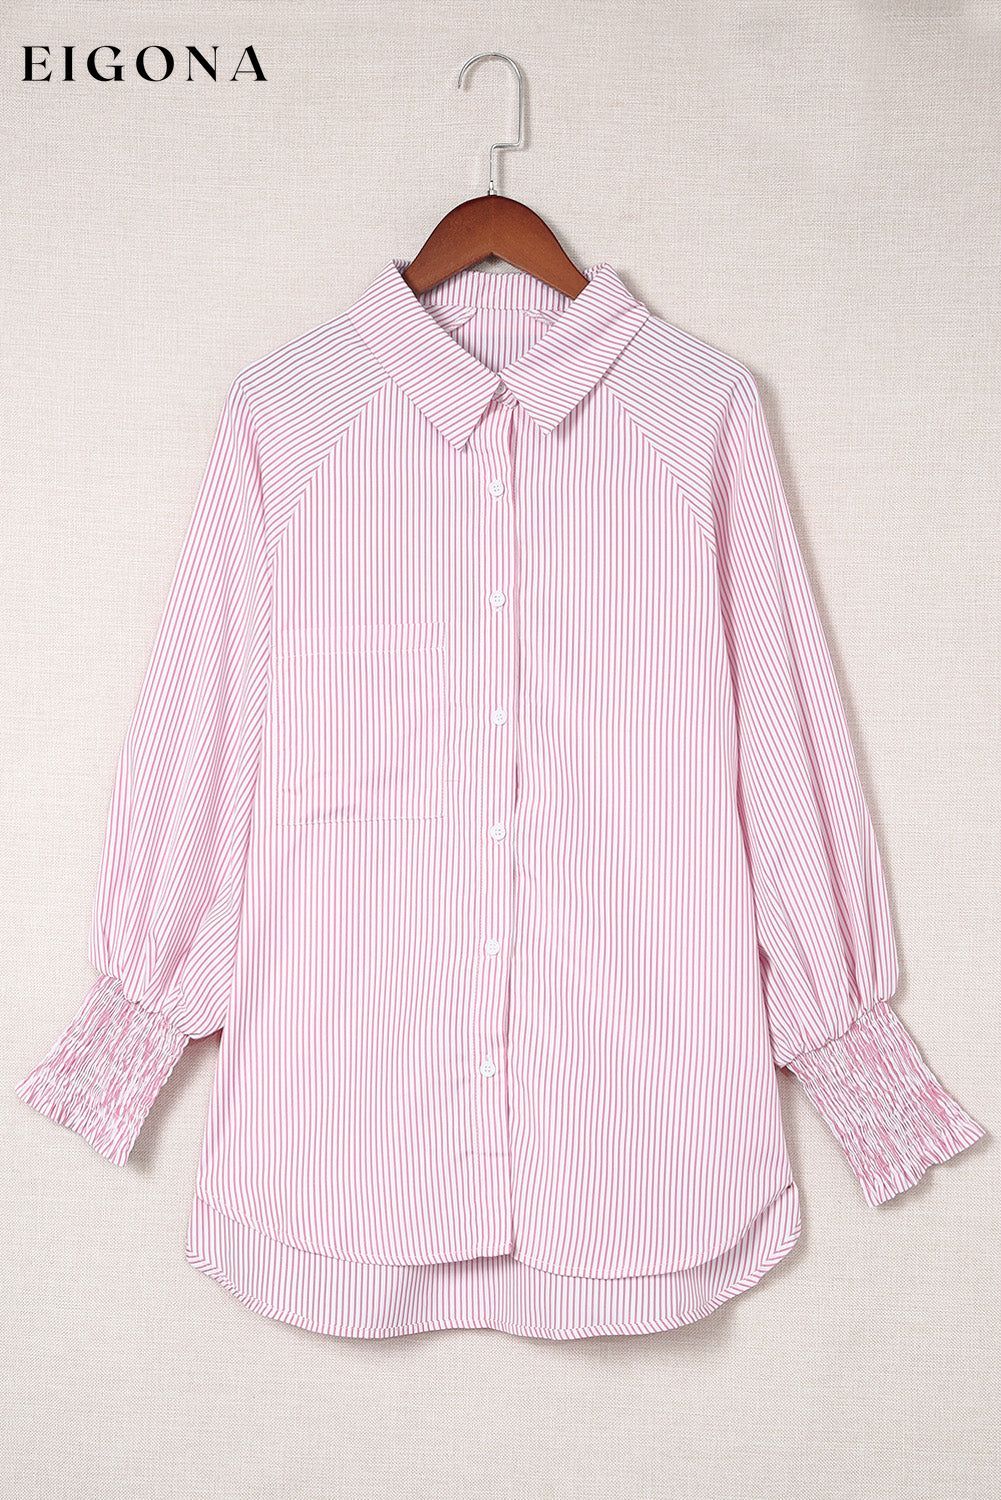 Pink Smocked Cuffed Striped Boyfriend Shirt with Pocket All In Stock button down womens clothes Color Pink Craft Smocked DL Exclusive Early Fall Collection long sleeve shirts long sleeve top Occasion Daily Print Stripe Season Spring Stripe tops Style Modern tops